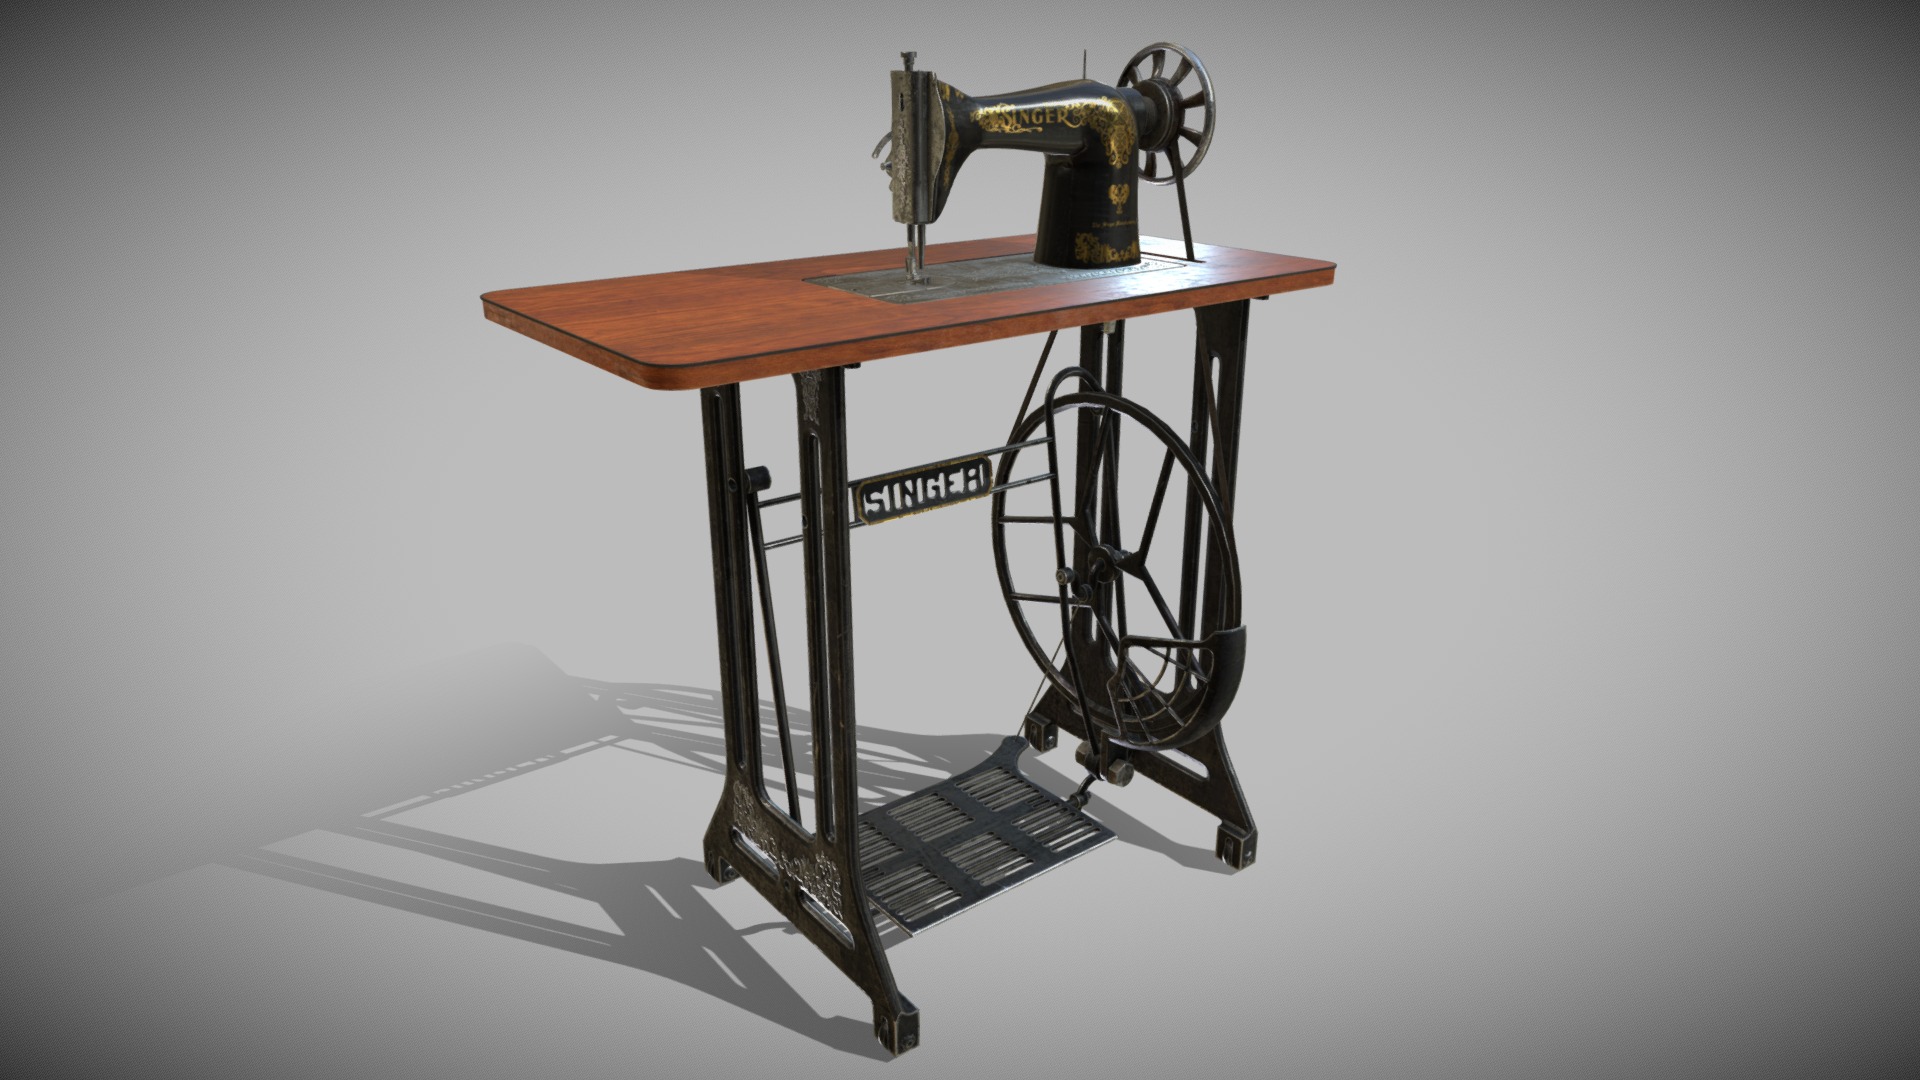 3D model Singer - This is a 3D model of the Singer. The 3D model is about a table with a wheel on it.